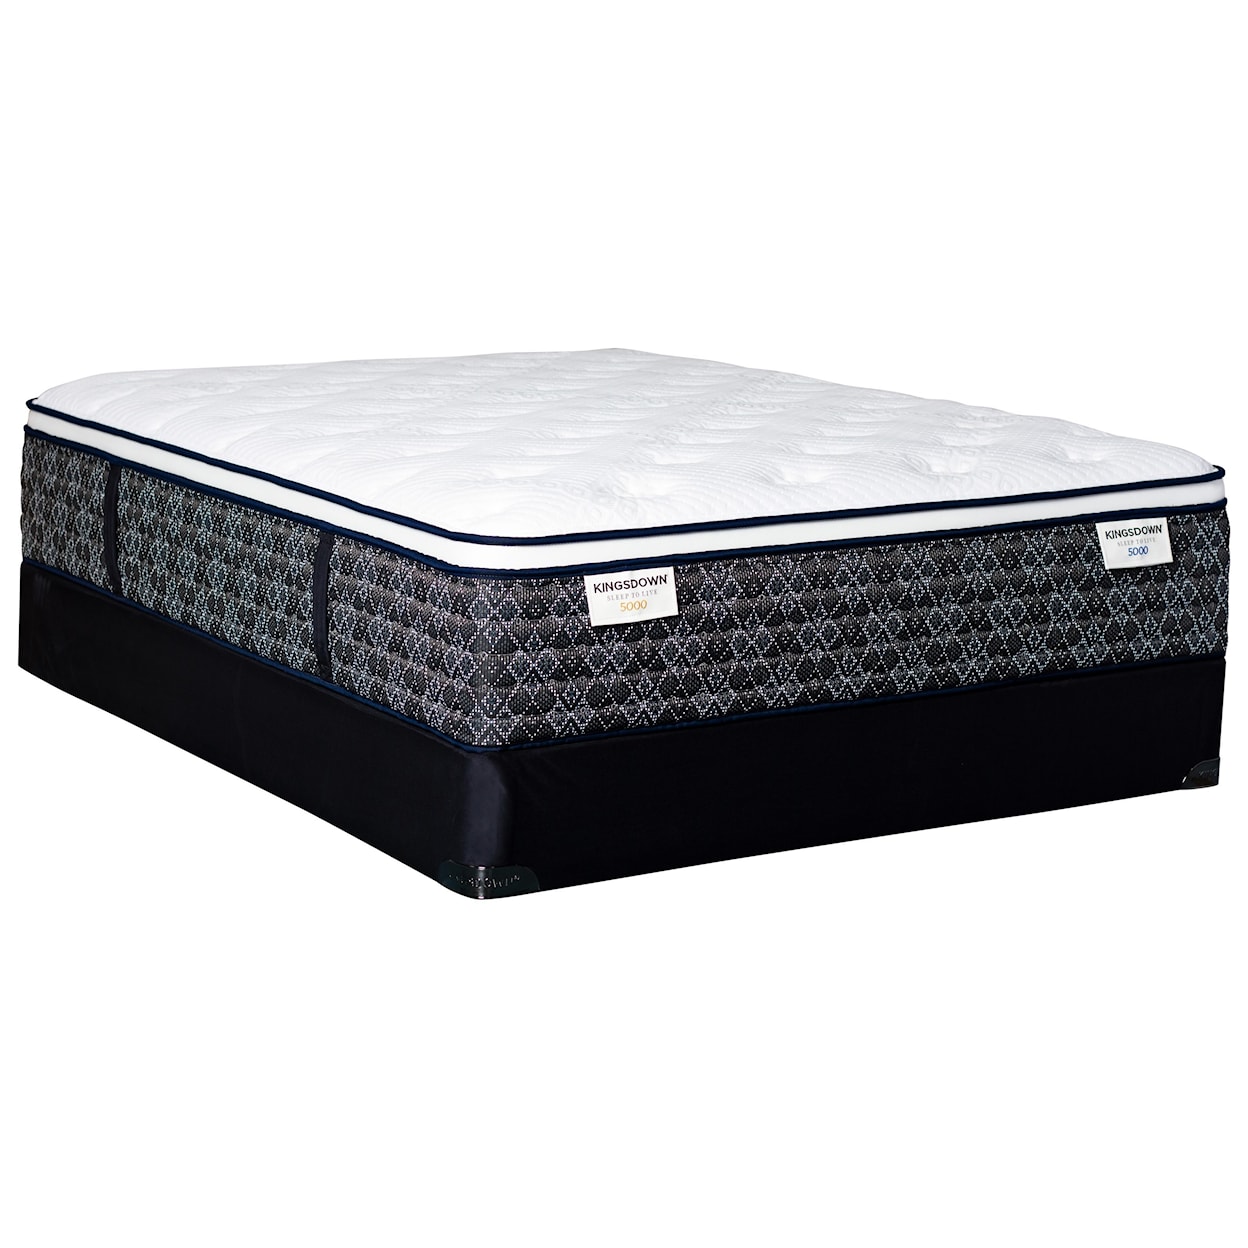 Kingsdown Sleep to Live 5000 Green Red ET Queen Pocketed Coil Mattress LoPro Set